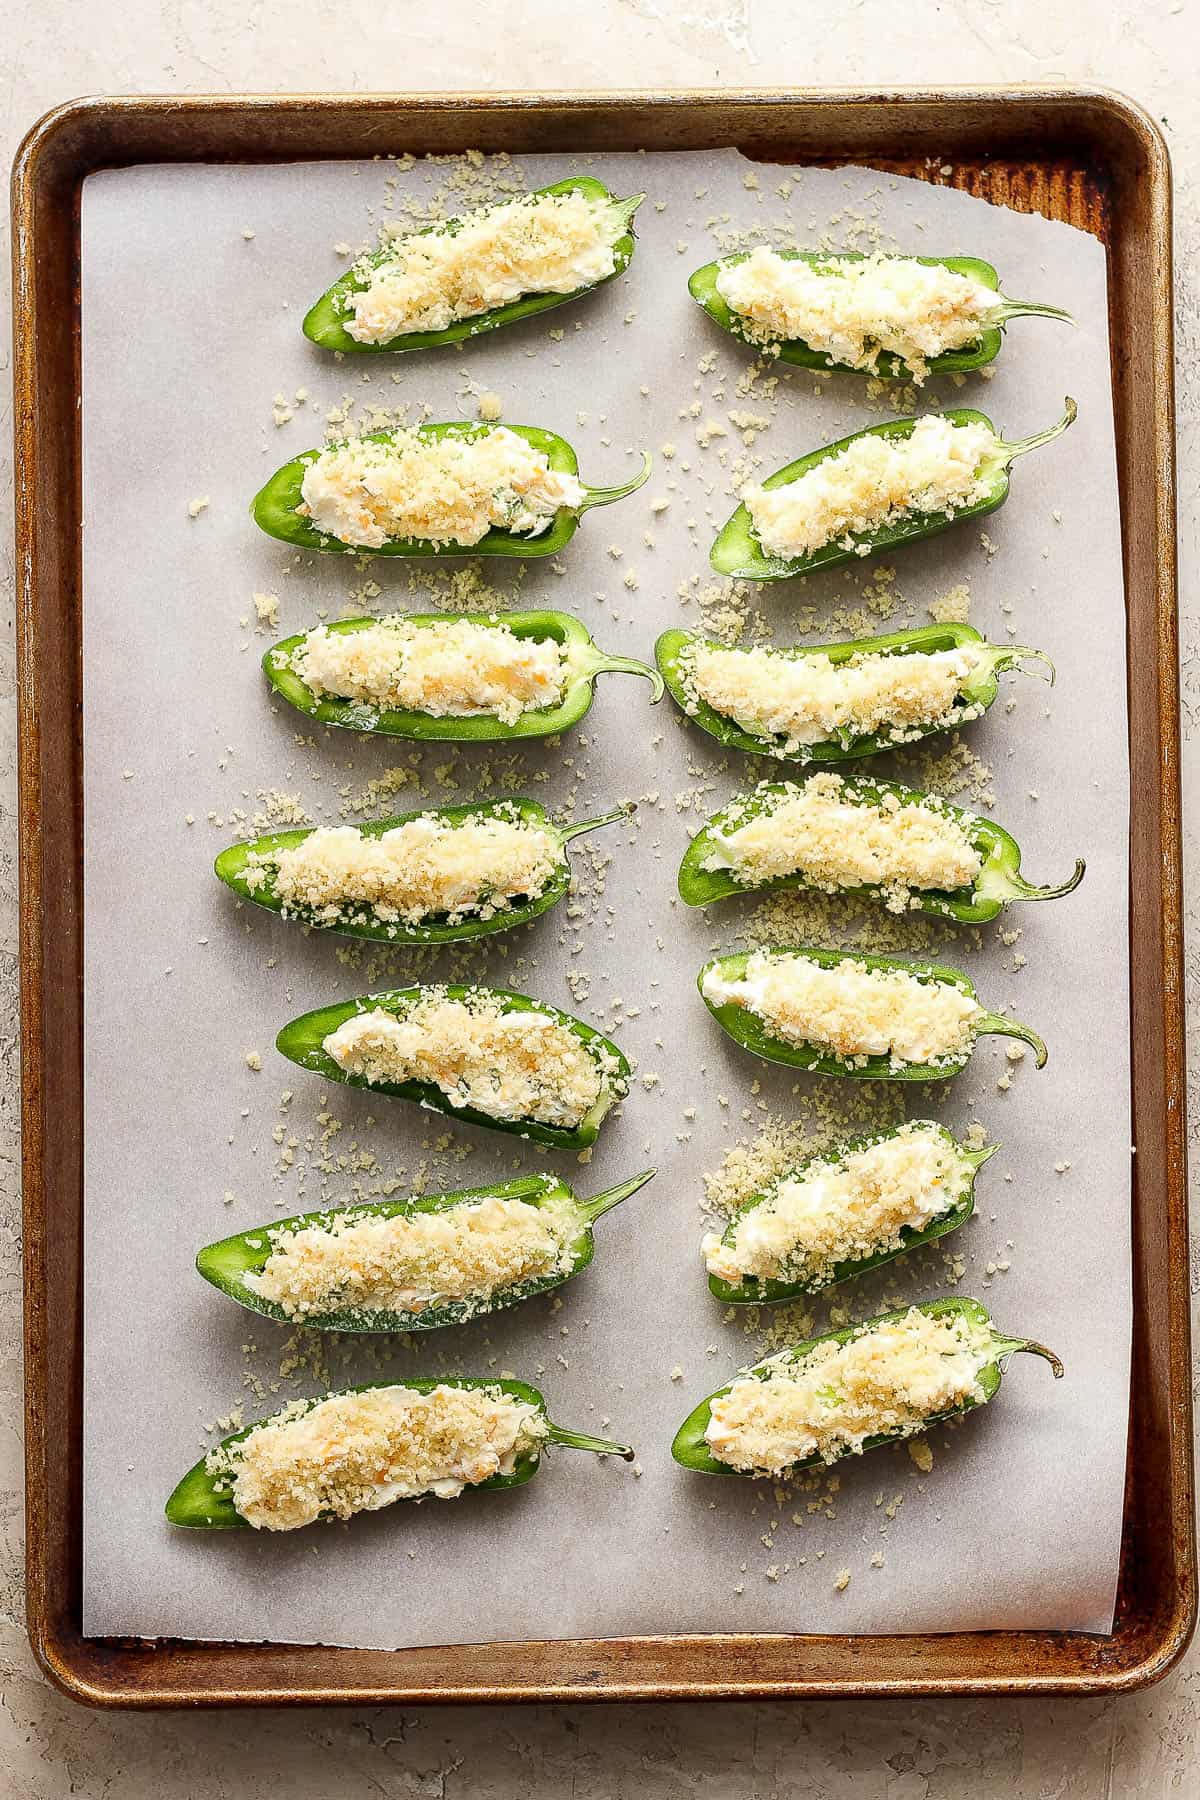 Unbaked jalapeno poppers on a baking sheet lined with parchment paper.